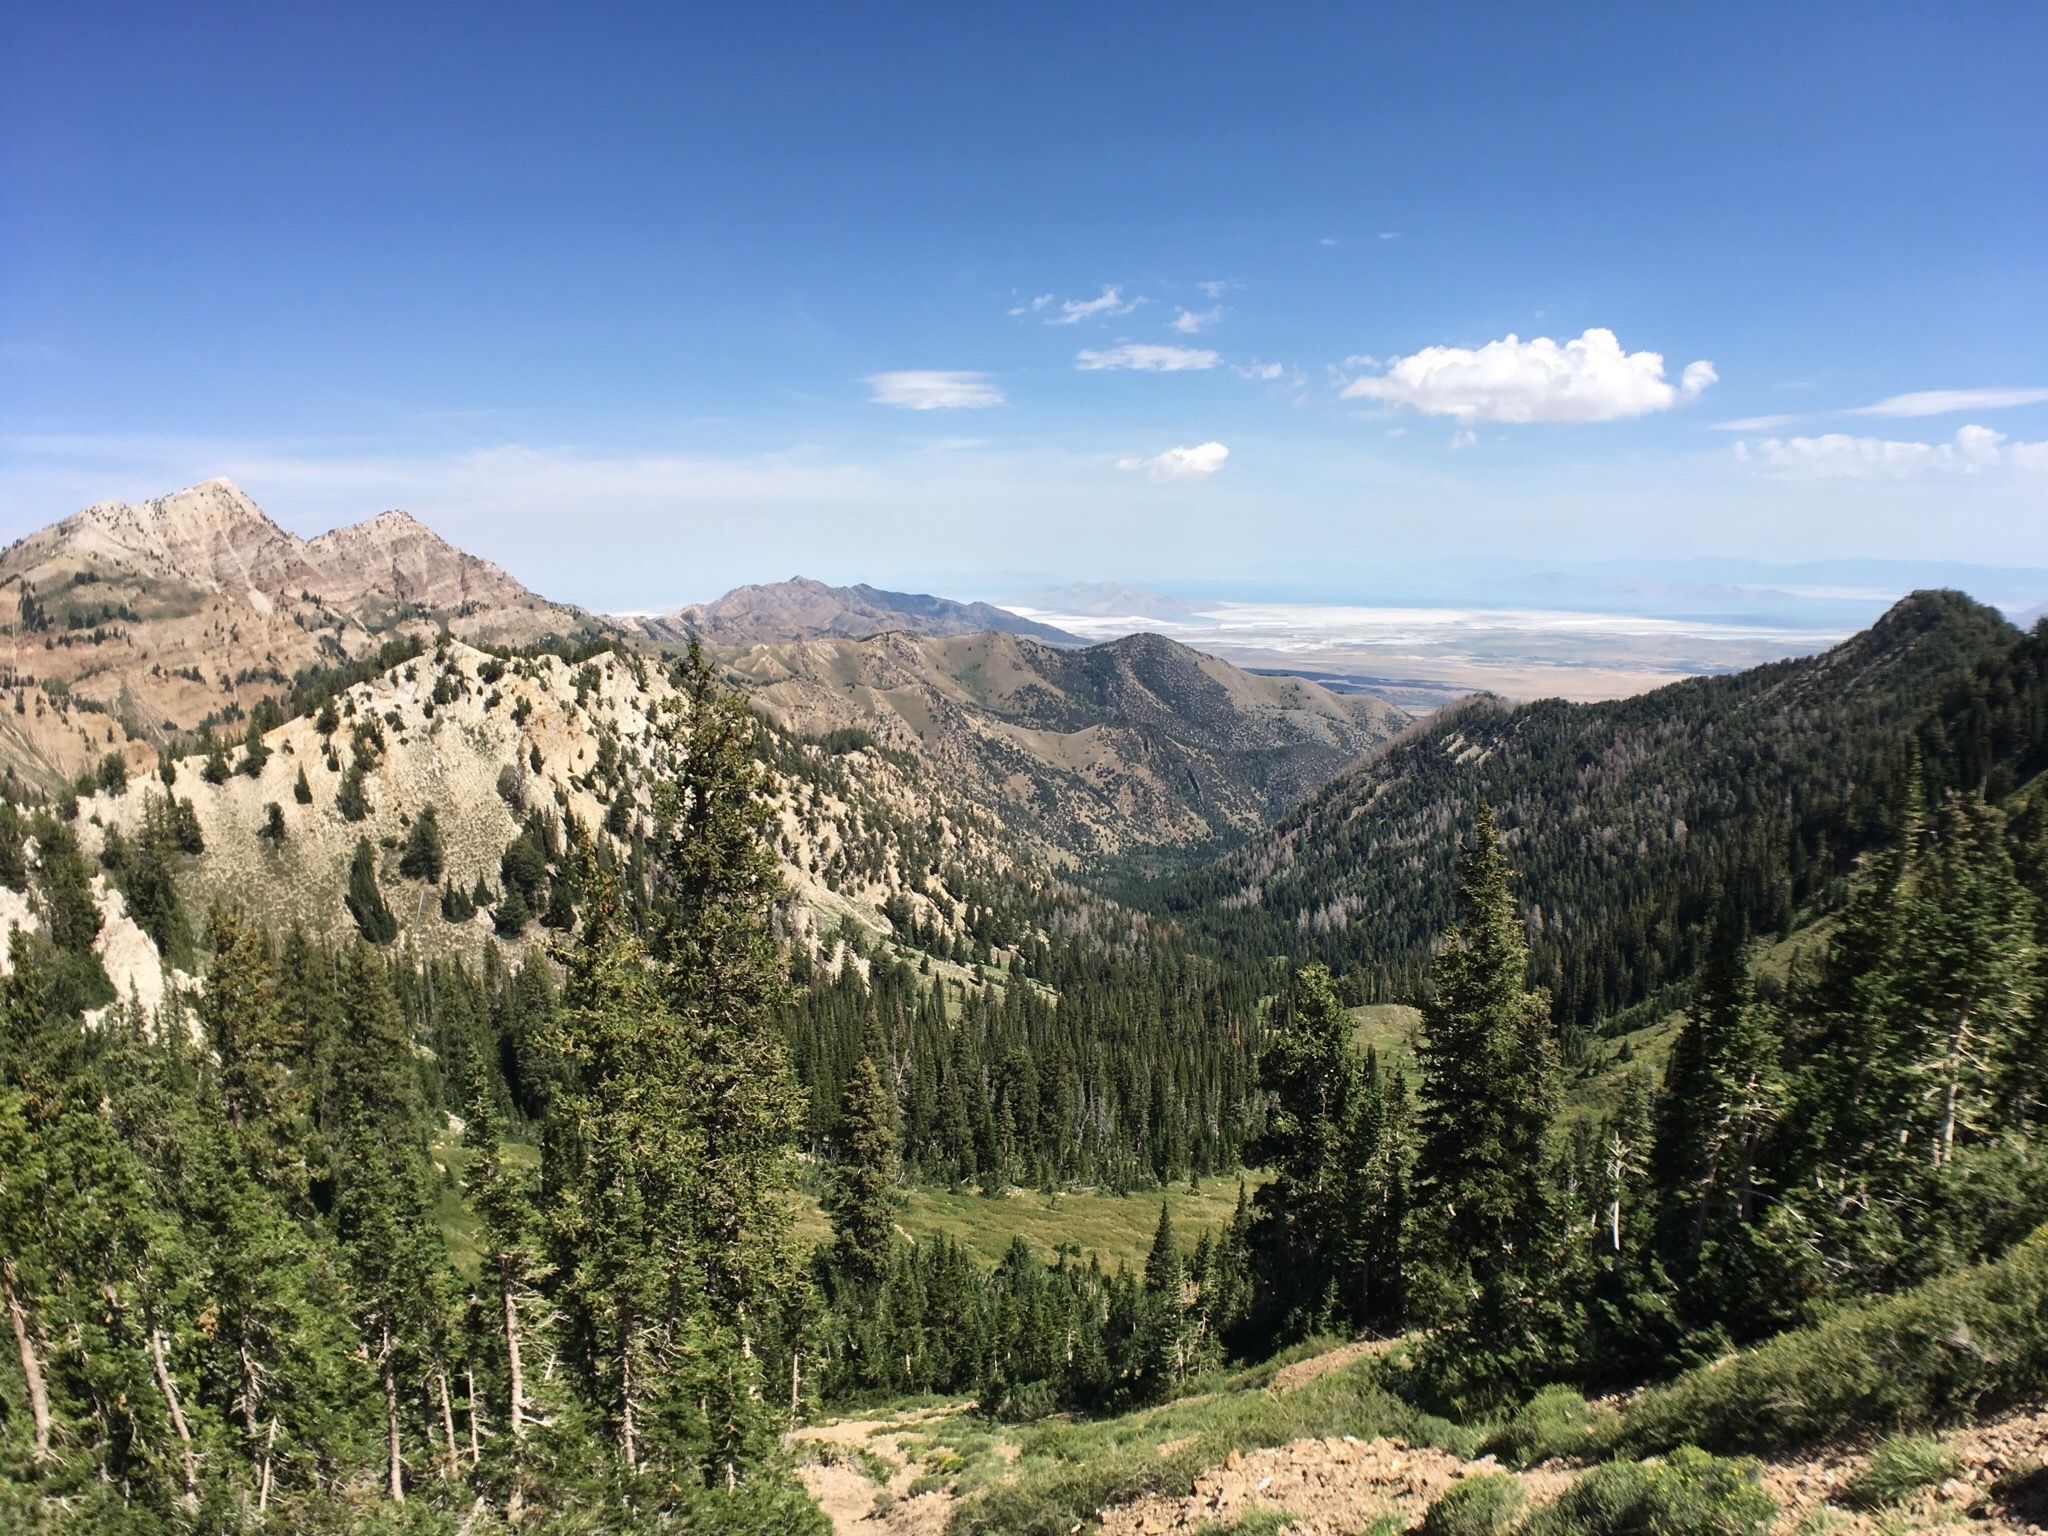 Utah's Deseret Peak Is A Difficult Hike, But The Views Are Worth It